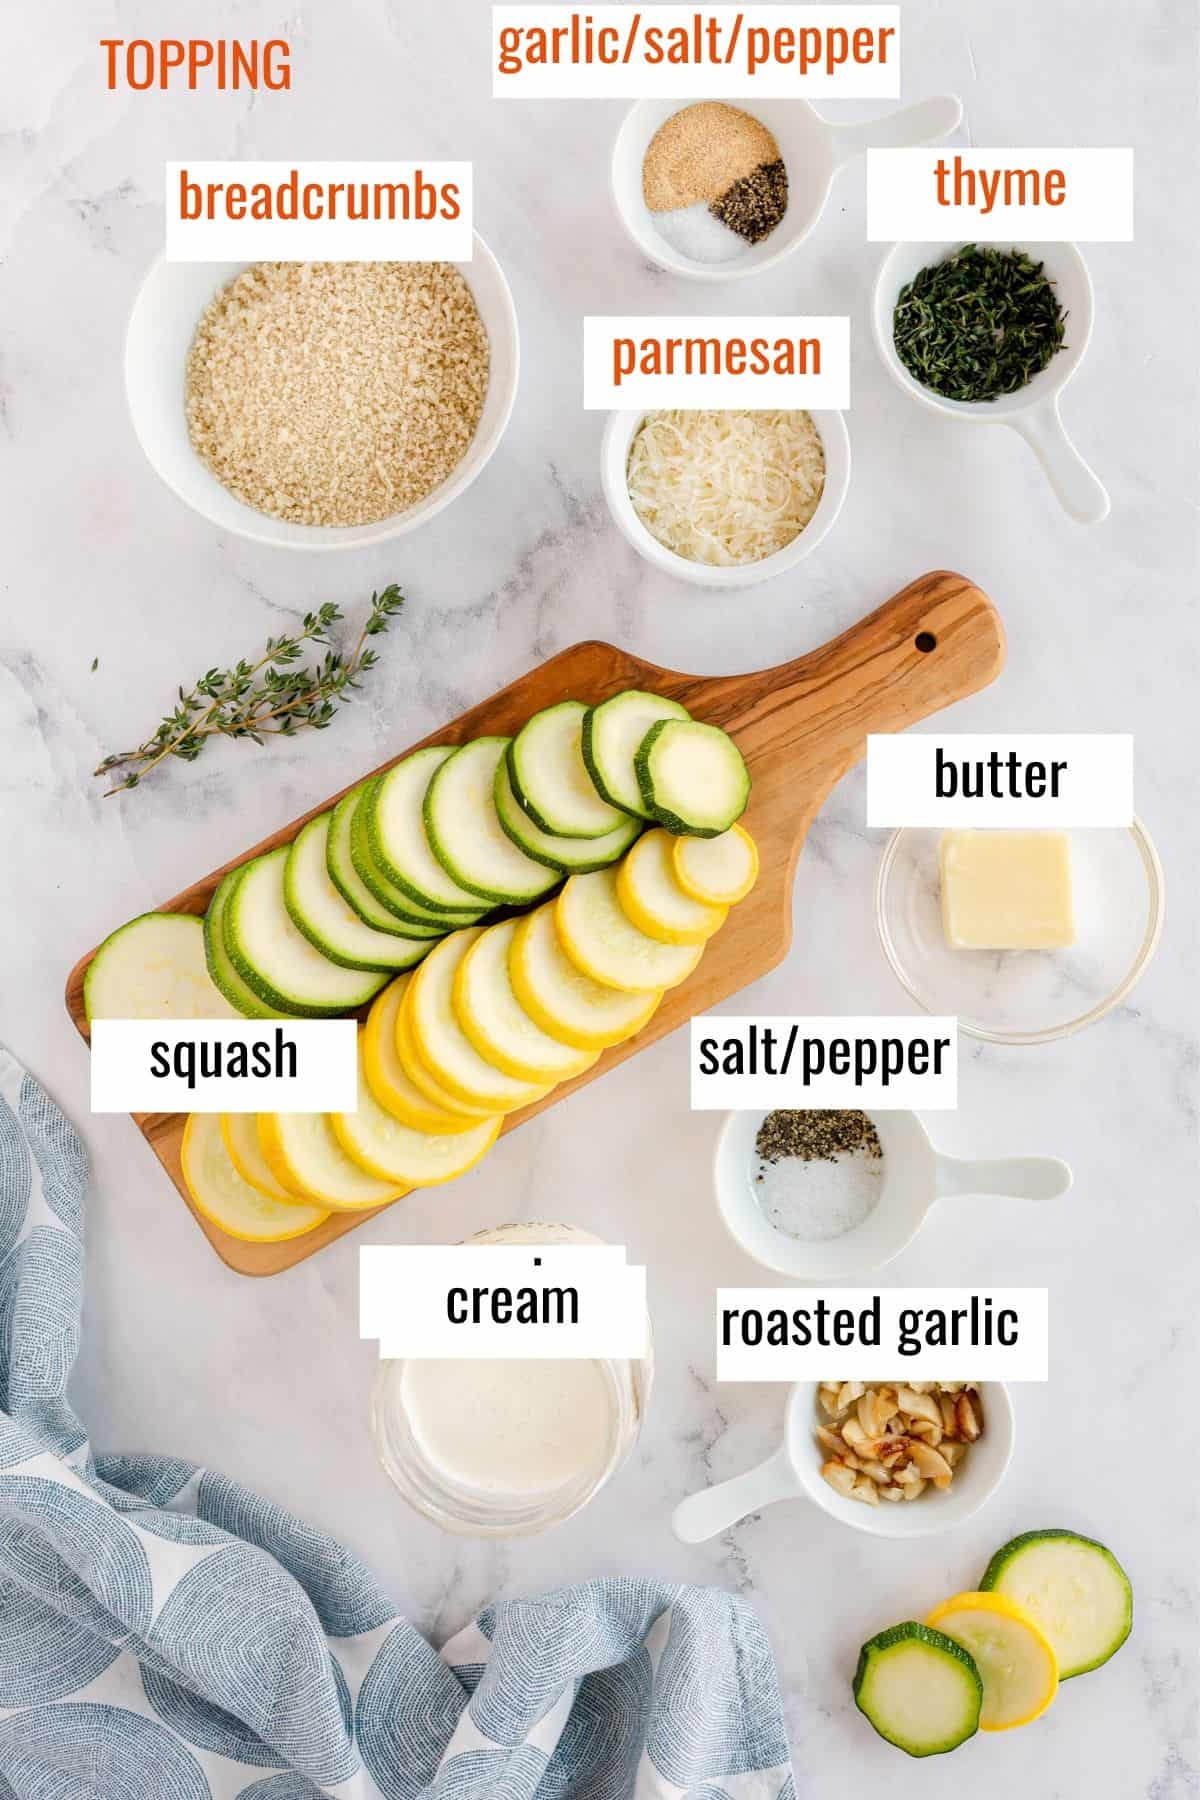 ingredients to make squash casserole laid out and labeled